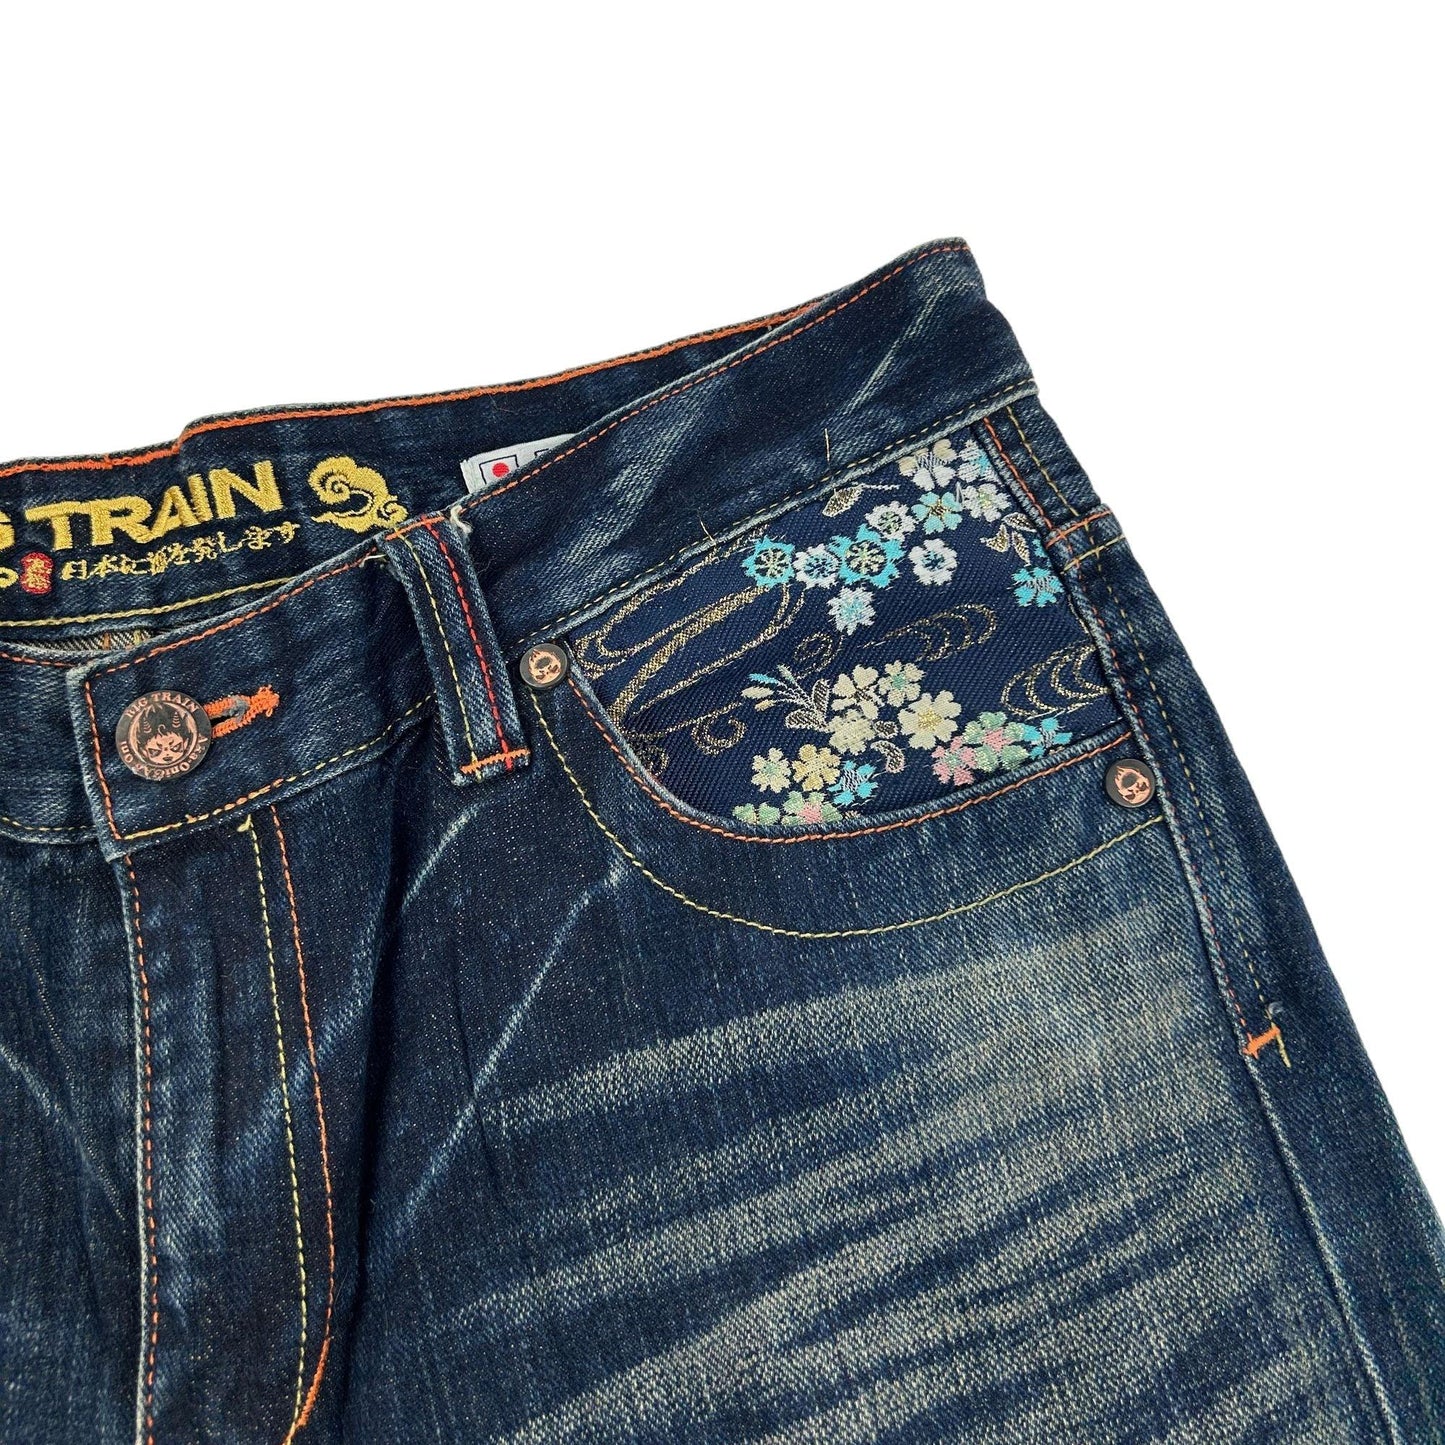 Vintage Wave Big Train Japanese Embroidered Denim Jeans Size W32 - Known Source